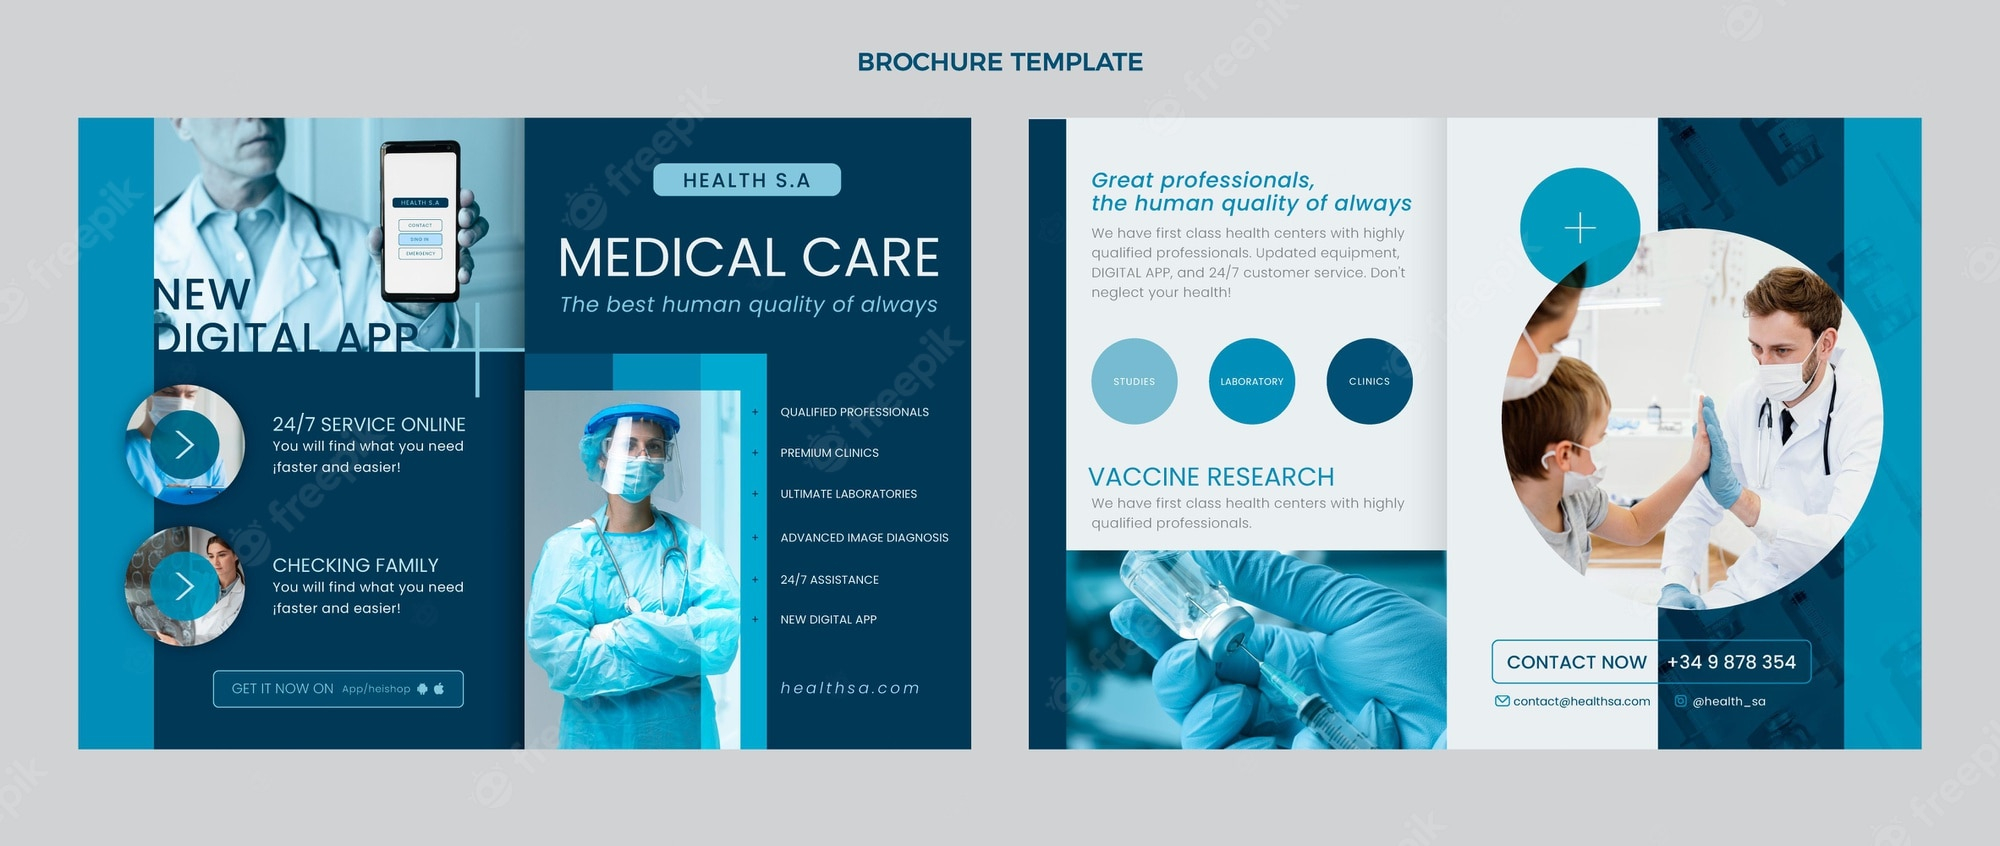 Doctors brochure Images  Free Vectors, Stock Photos & PSD Throughout Medical Office Brochure Templates